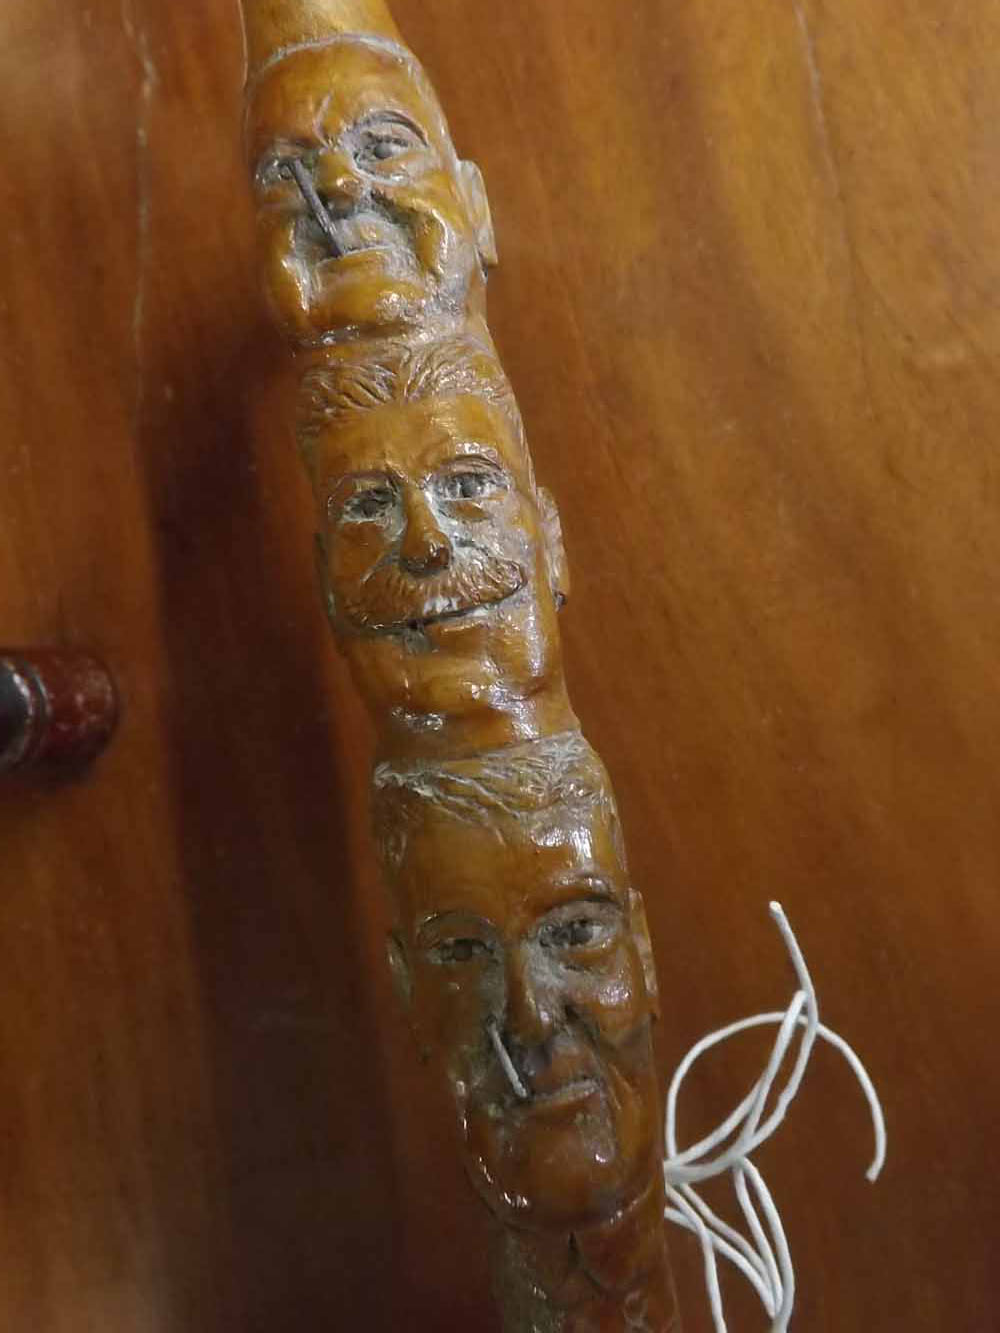 Carved walking stick, marked "W Curtis Aylsham 1939-1945 The Big Three Victory", 32" long - Image 2 of 4